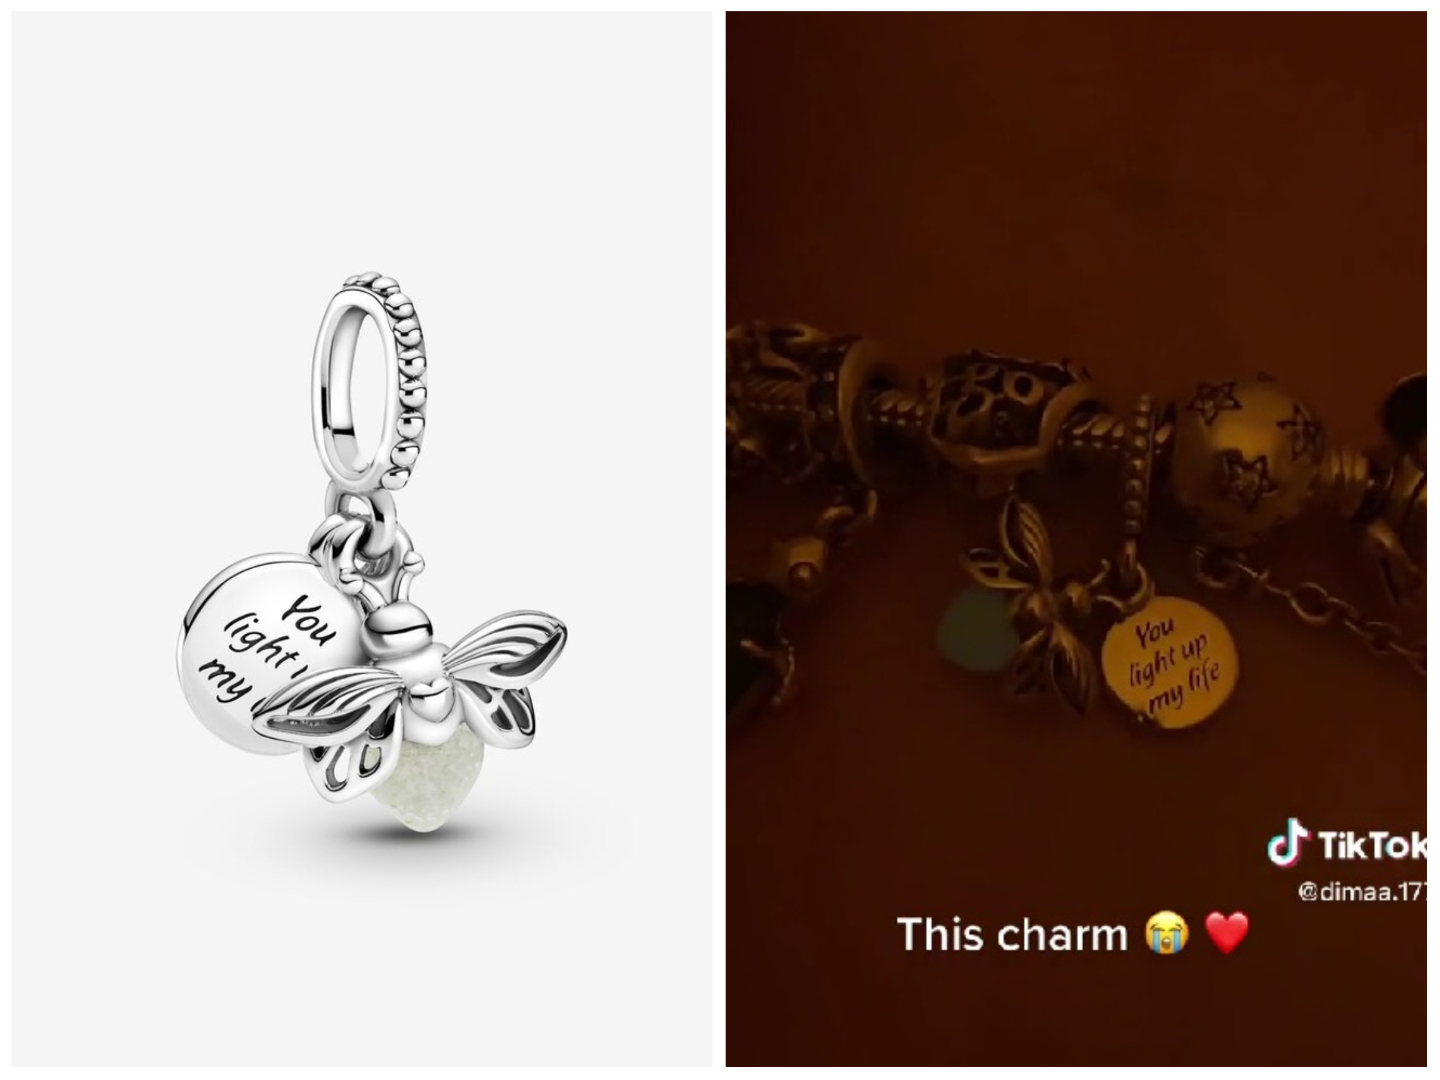 This Pandora firefly charm is selling out after going viral on TikTok